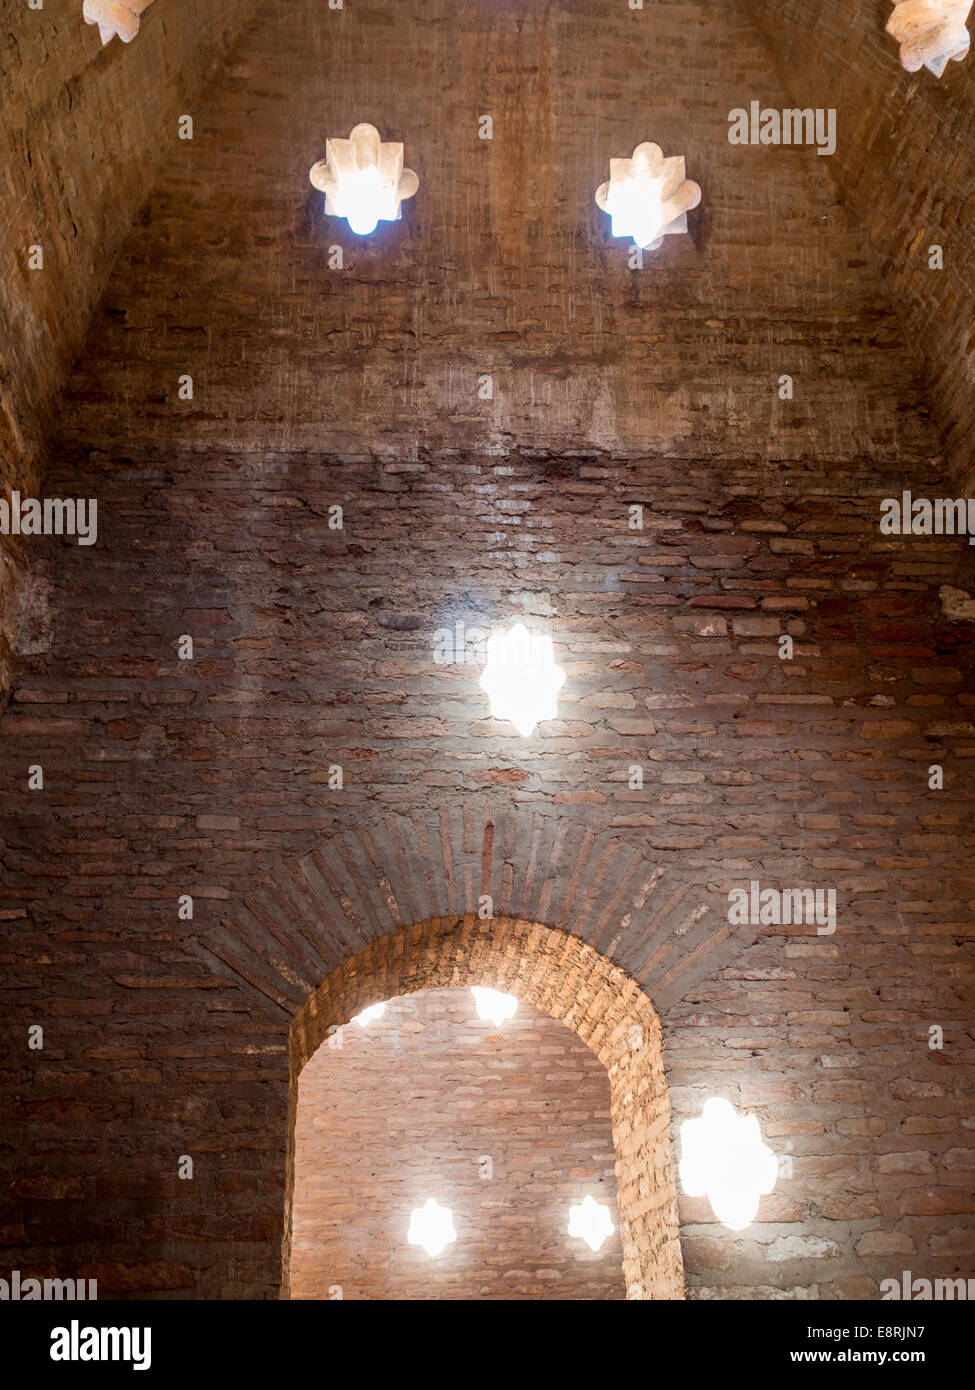 Mosque Baths High Resolution Stock Photography and Images - Alamy